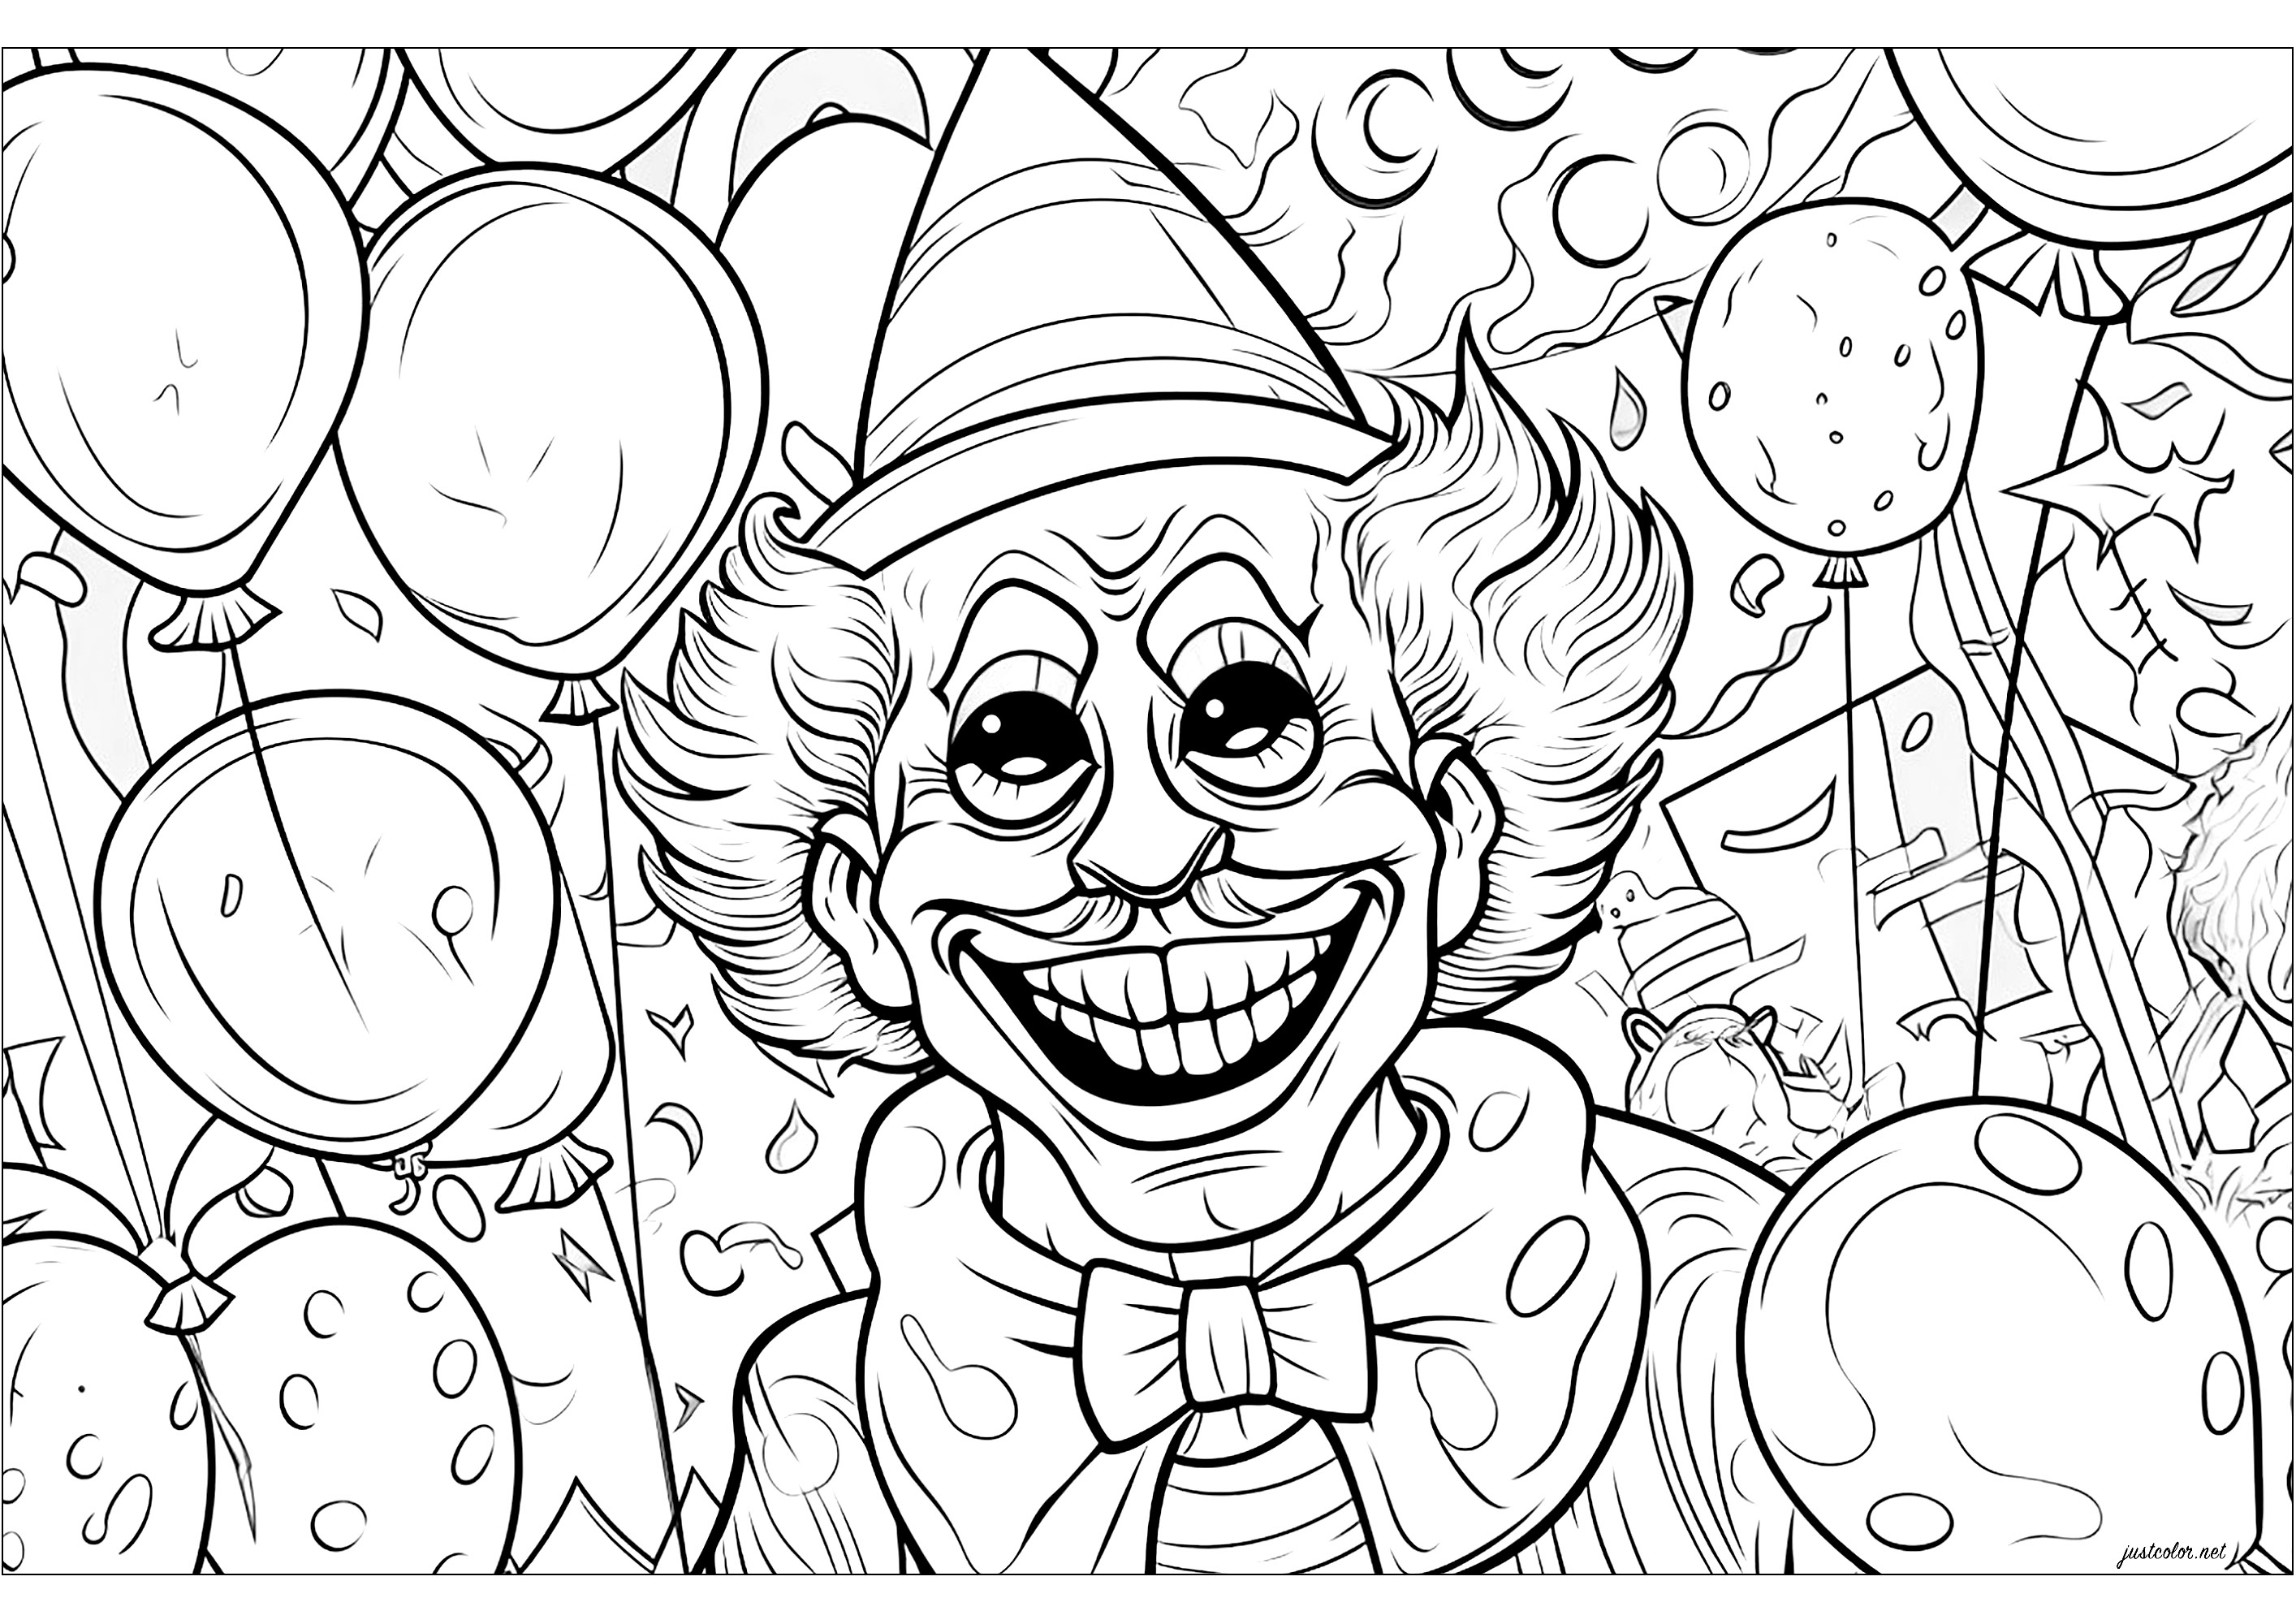 Bruno the evil clown. He comes to liven up your birthday parties ...